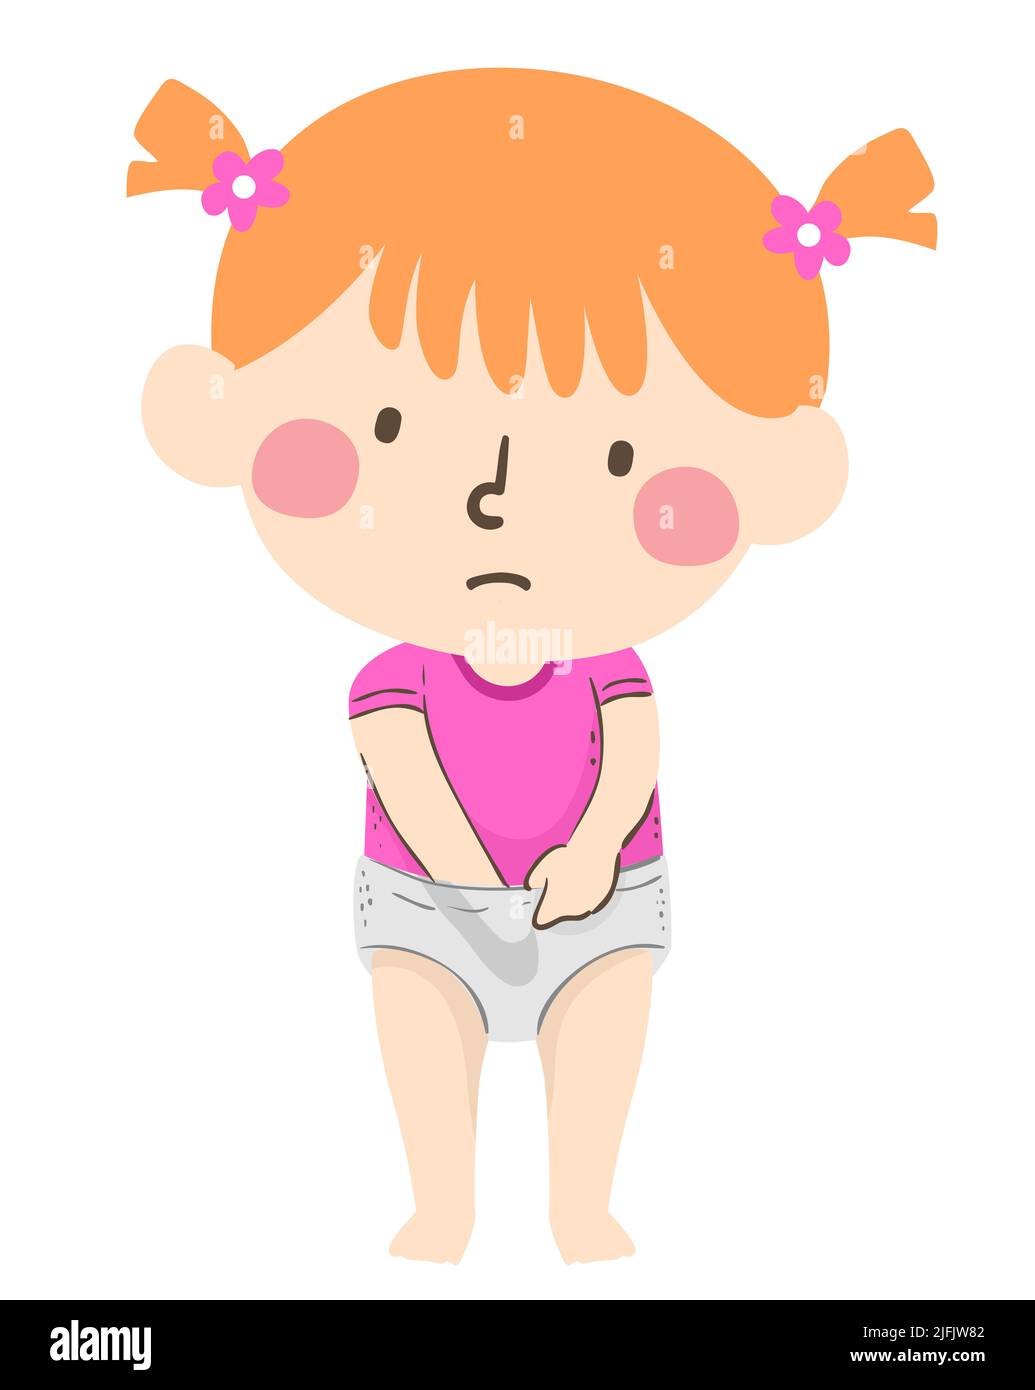 Illustration of Kid Girl Standing with Hand Inside Her Underwear Touching Private Body Part Stock Photo